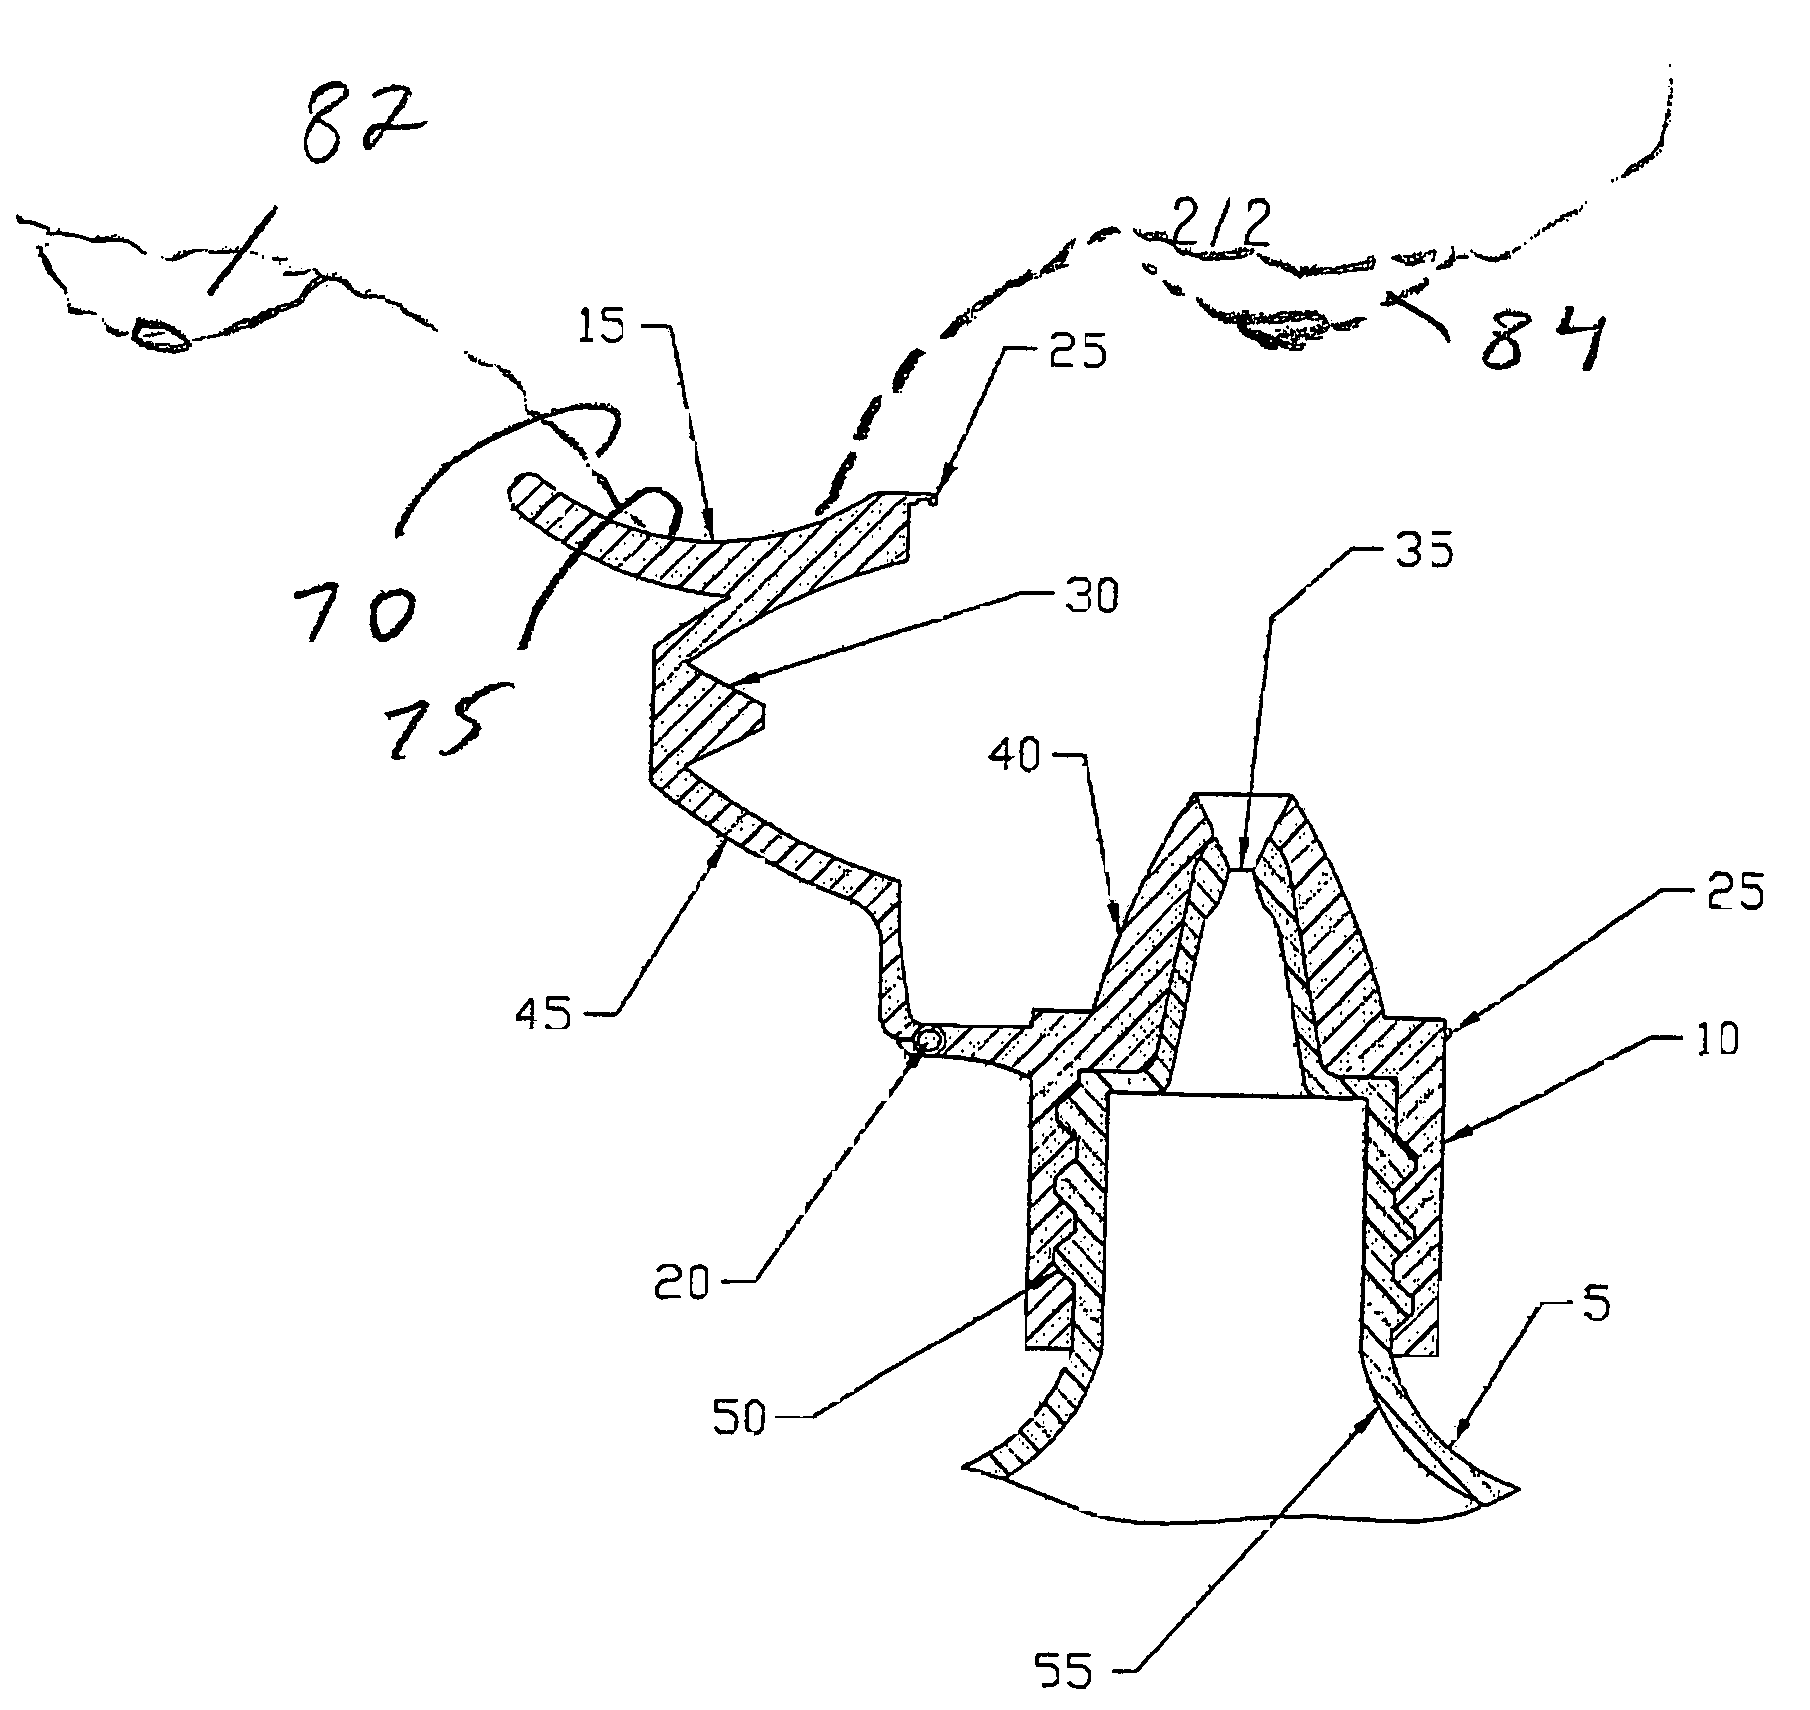 Ocular positioning droplet dispensing device with a recessed dispensing orifice